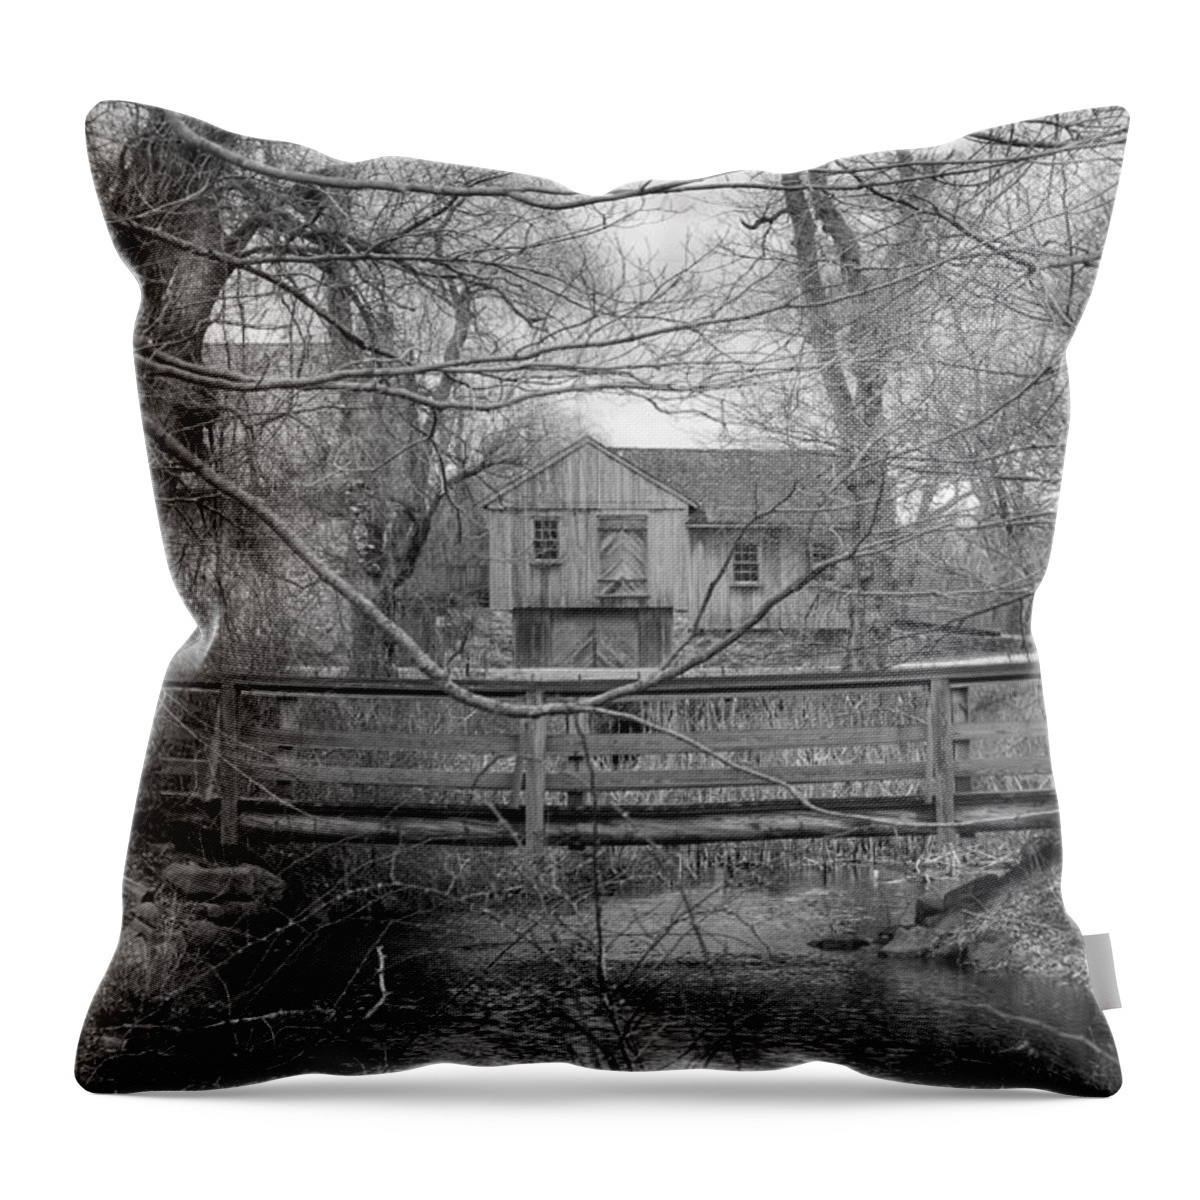 Waterloo Village Throw Pillow featuring the photograph Wooden Bridge Over Stream - Waterloo Village by Christopher Lotito